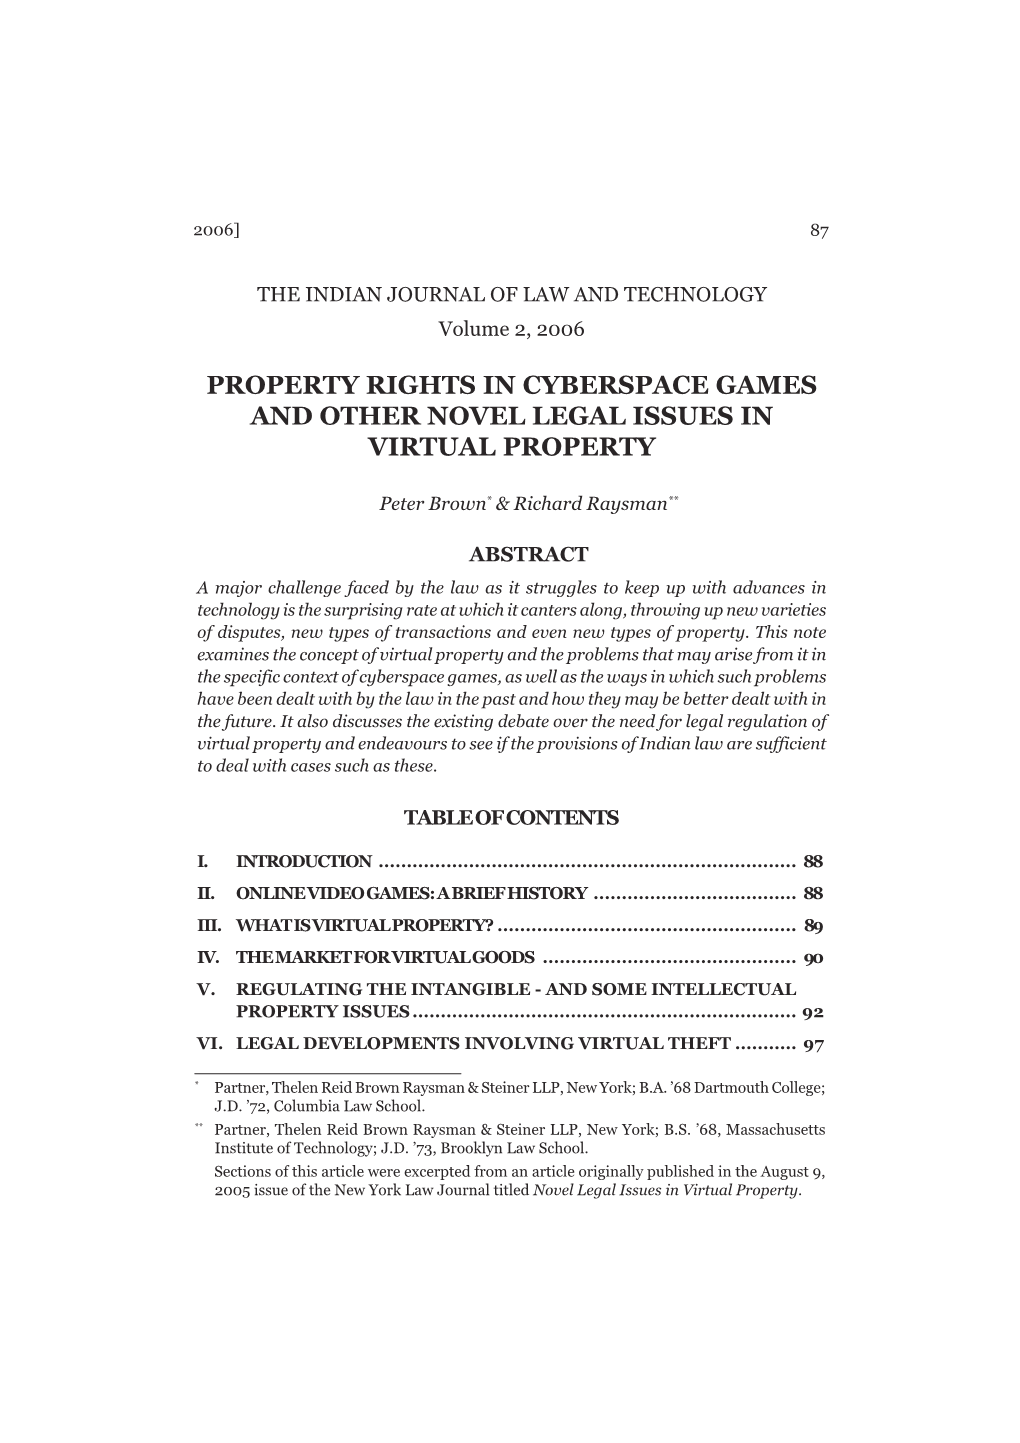 Property Rights in Cyberspace Games and Other Novel Legal Issues in Virtual Property